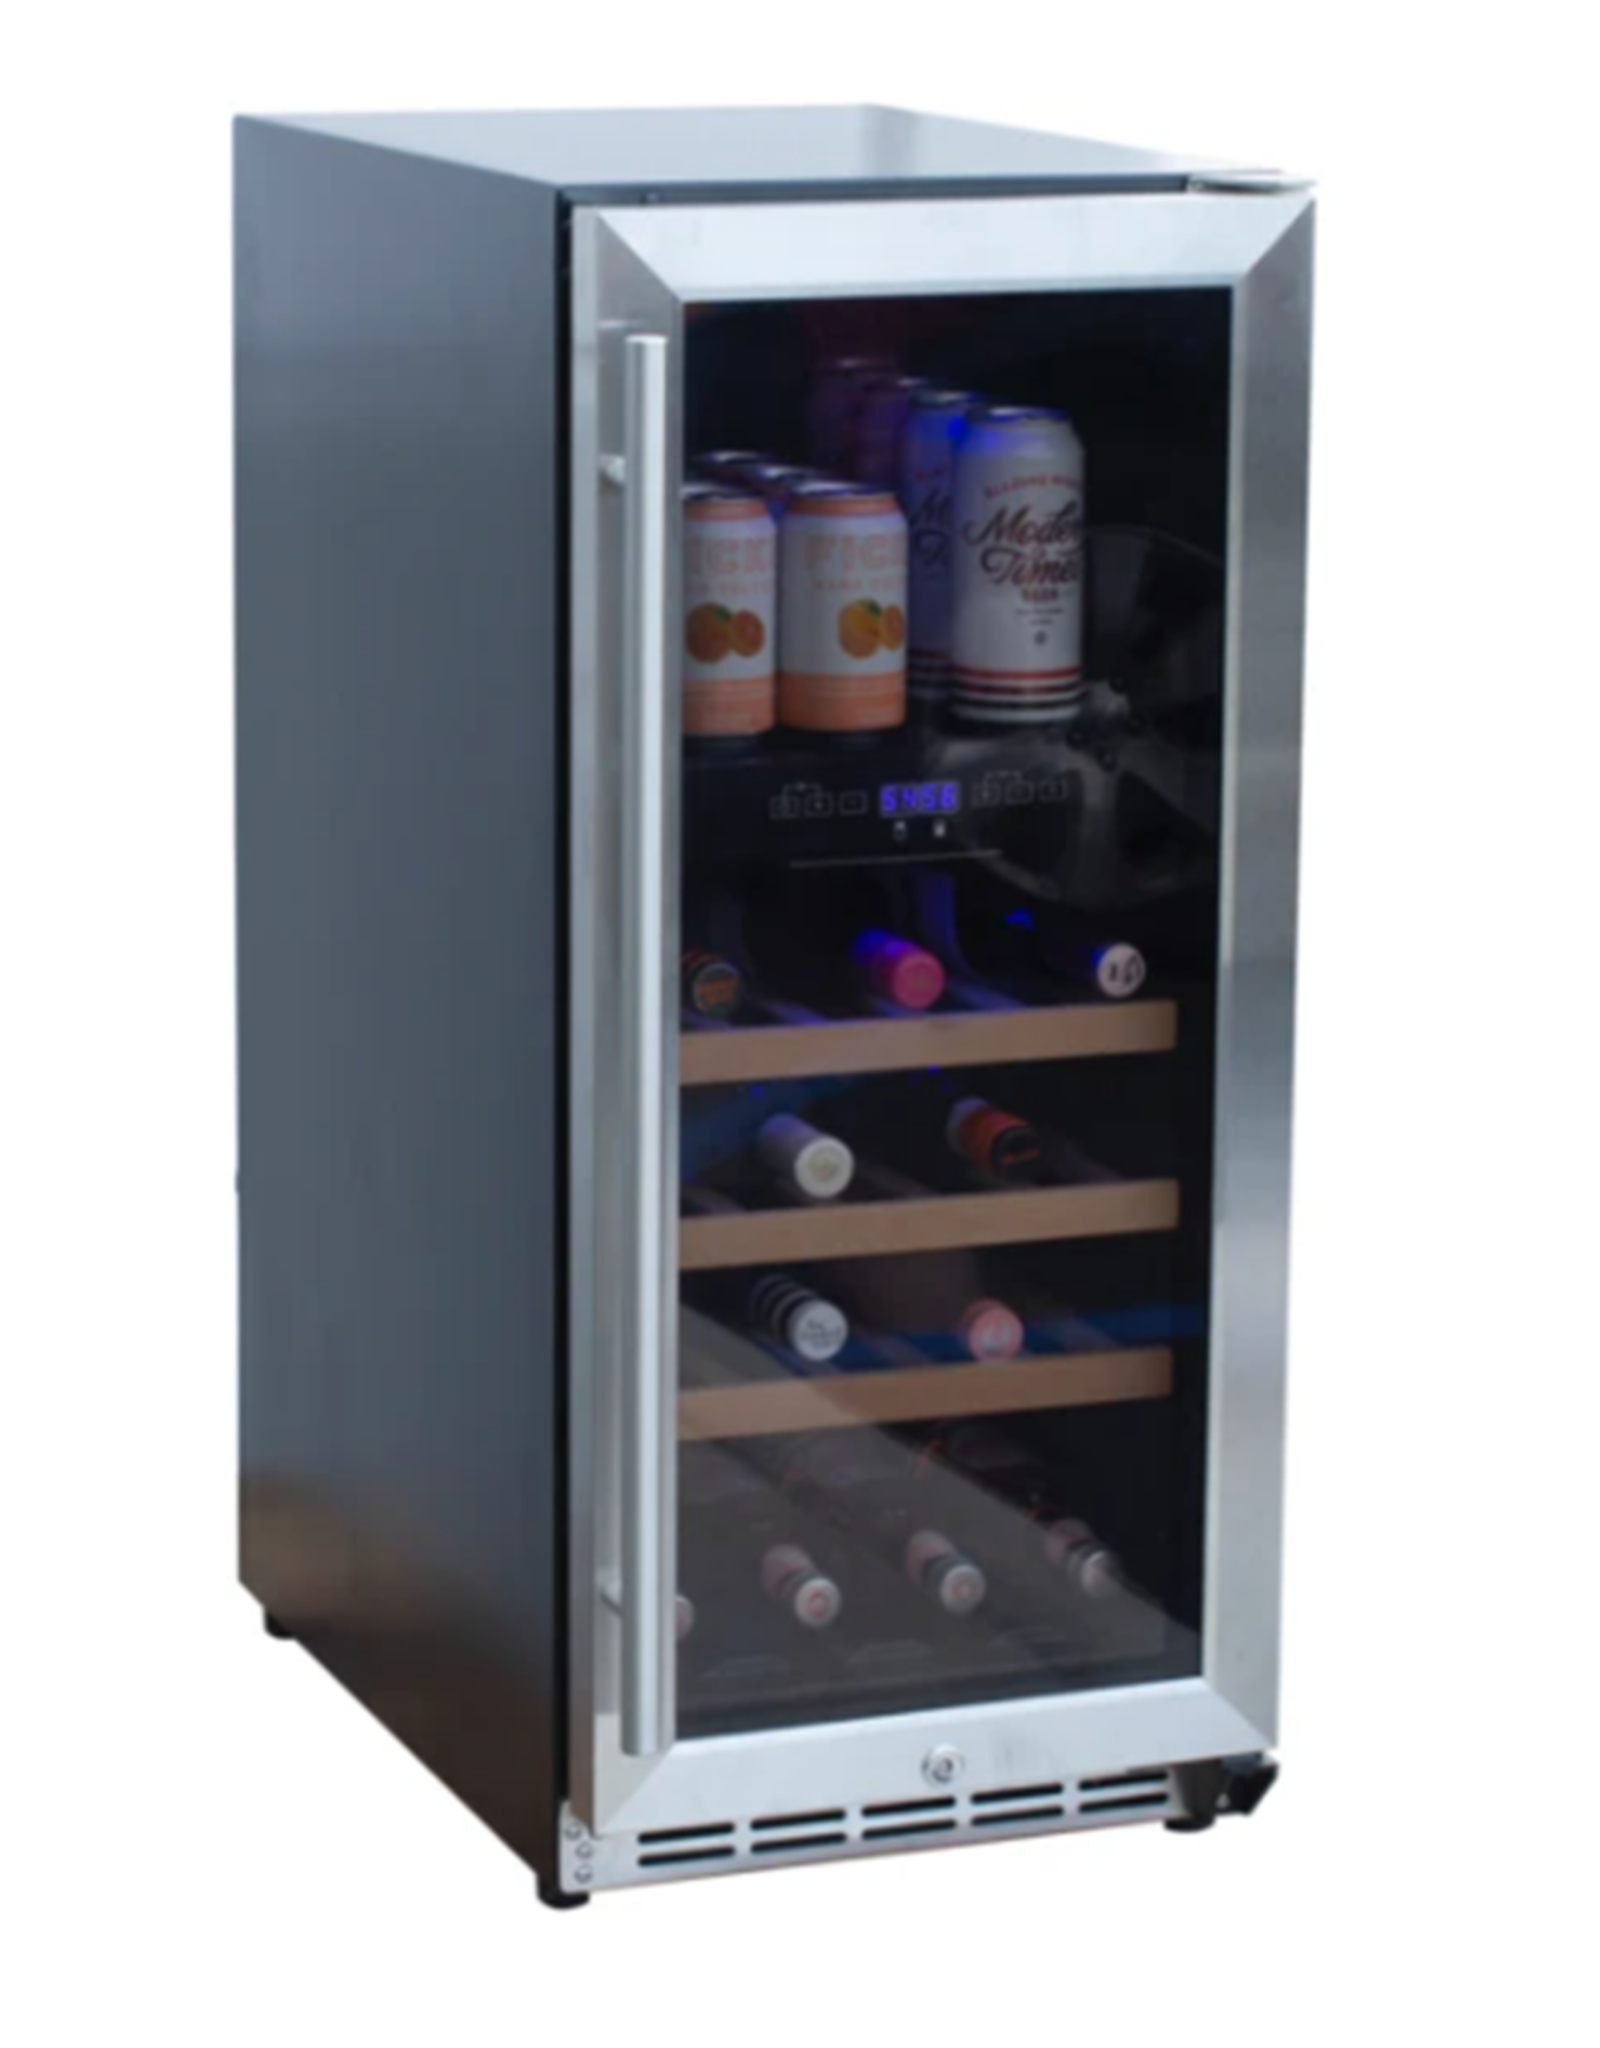 Renaissance Cooking Systems Renaissance Cooking Systems The Dual Zone Outdoor Rated Wine Cooler - RWC1